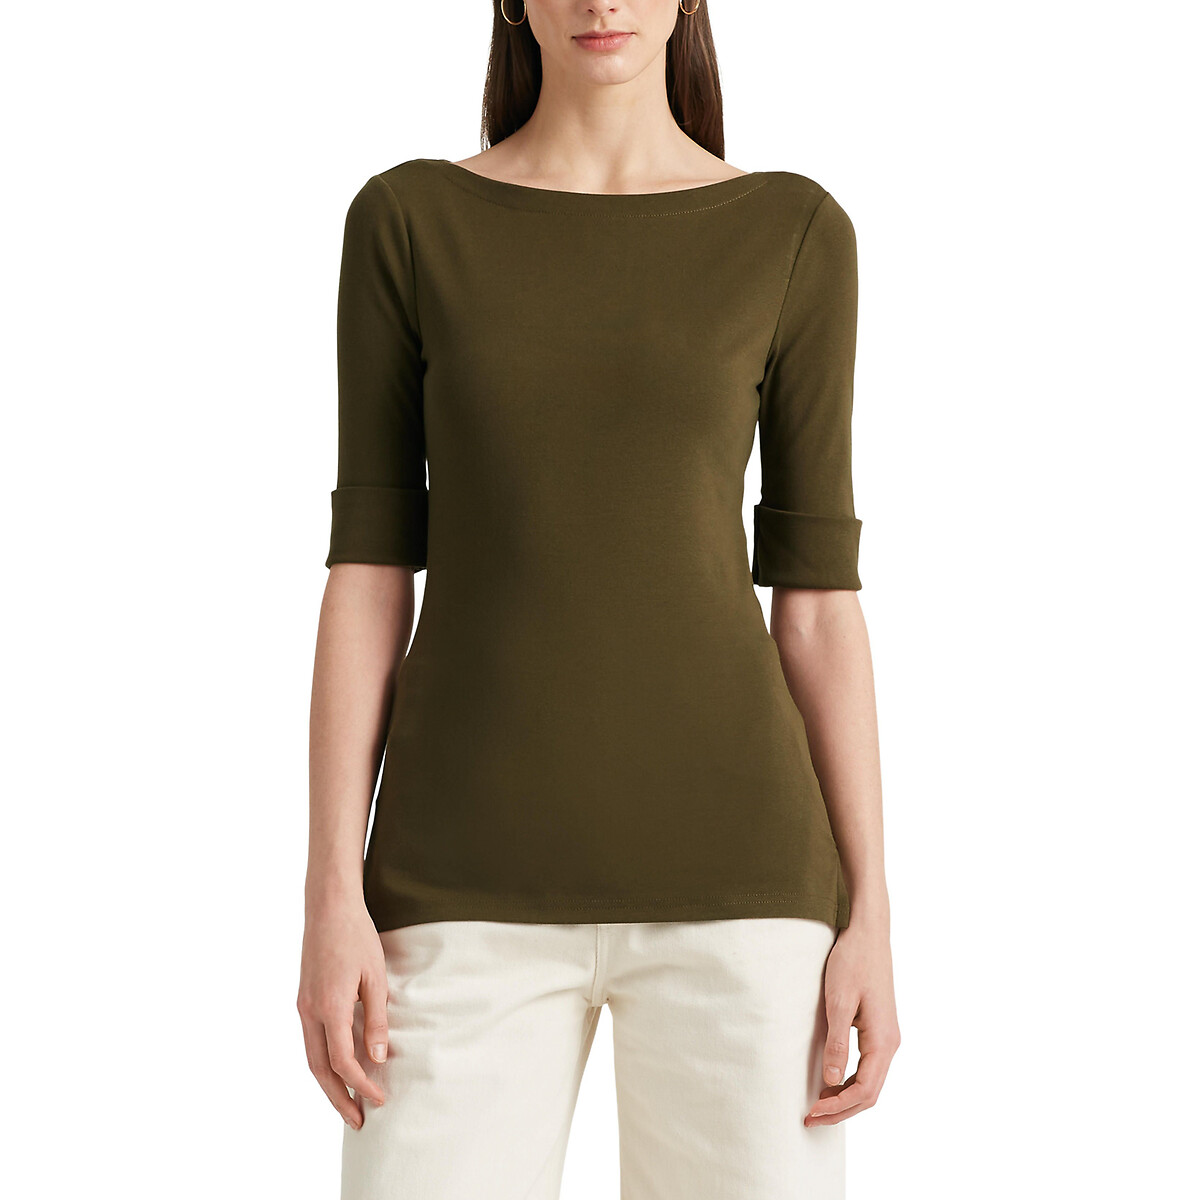 Stretch Cotton T-Shirt with Boat Neck and Elbow-Length Sleeves